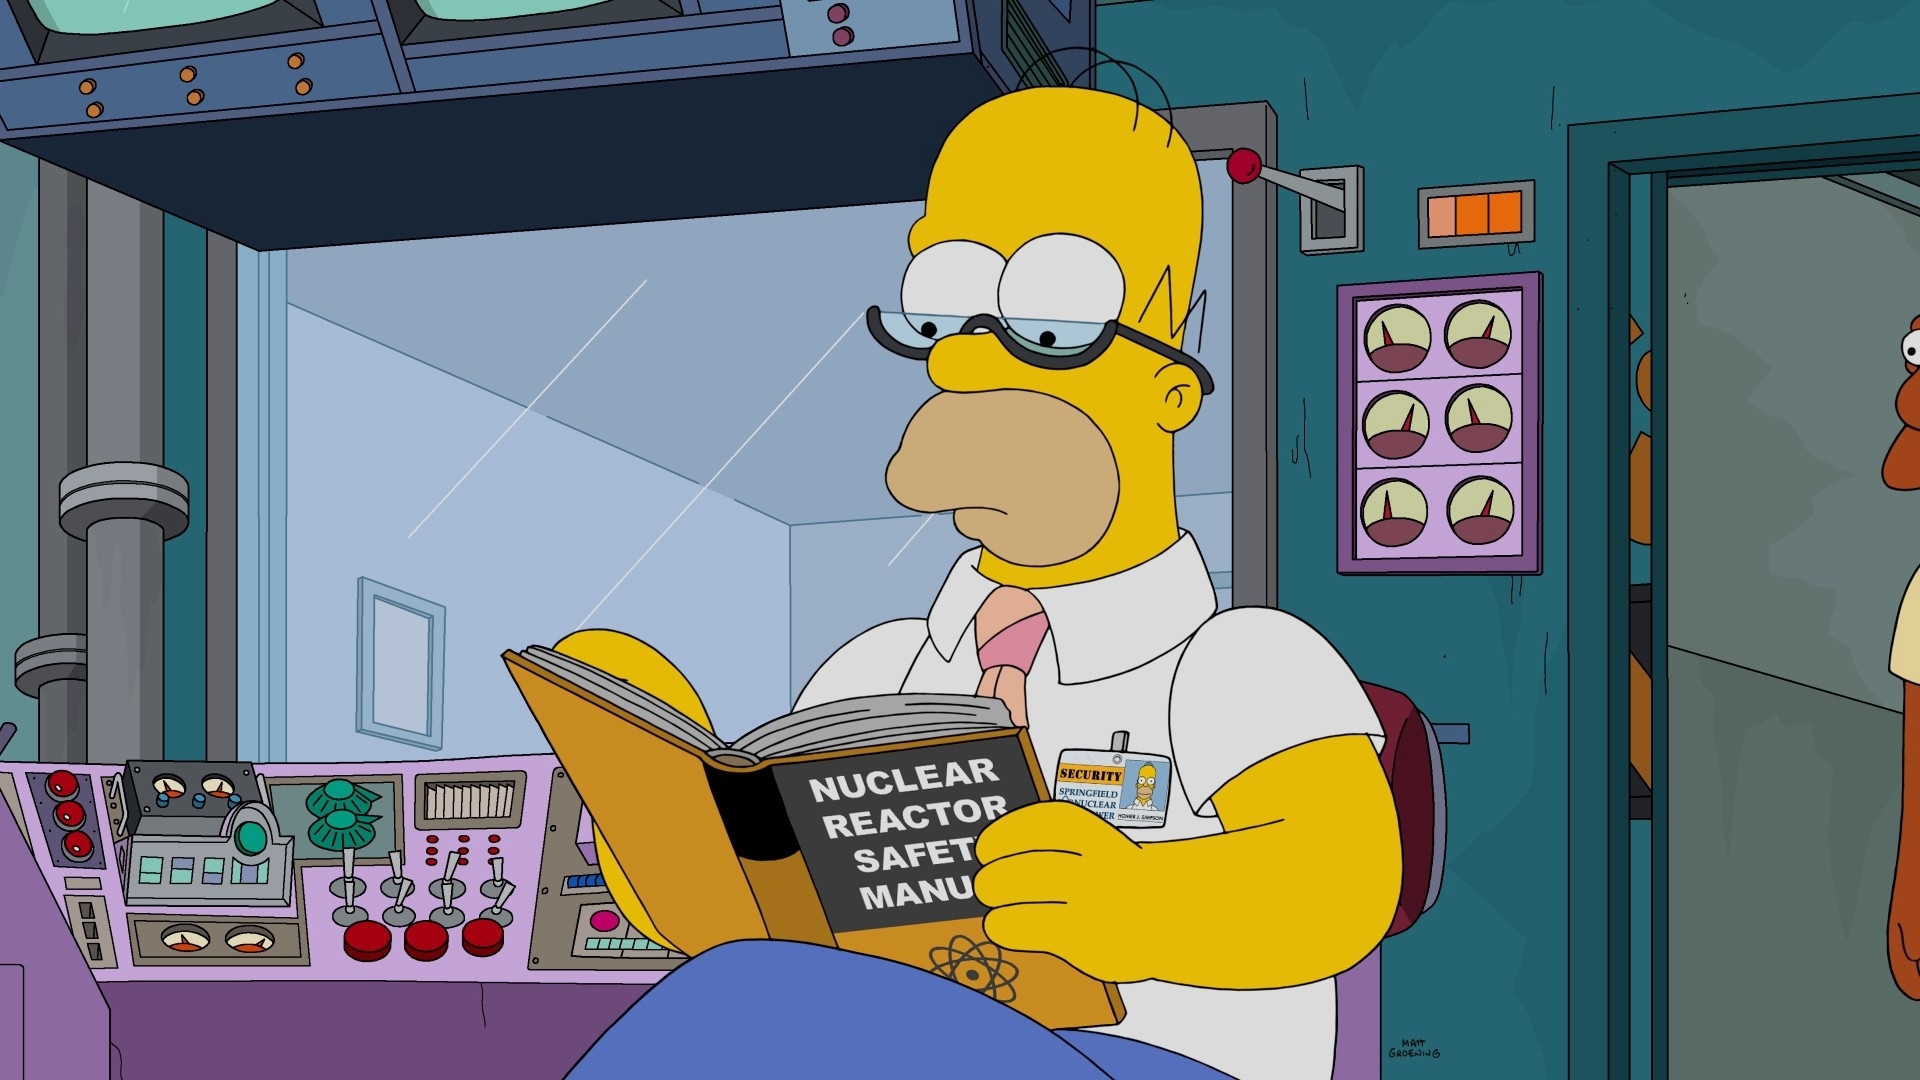 Homer Simpson reading &quot;Nuclear Reactor Safety Manual&quot; at work in the animated show &quot;The Simpsons&quot;